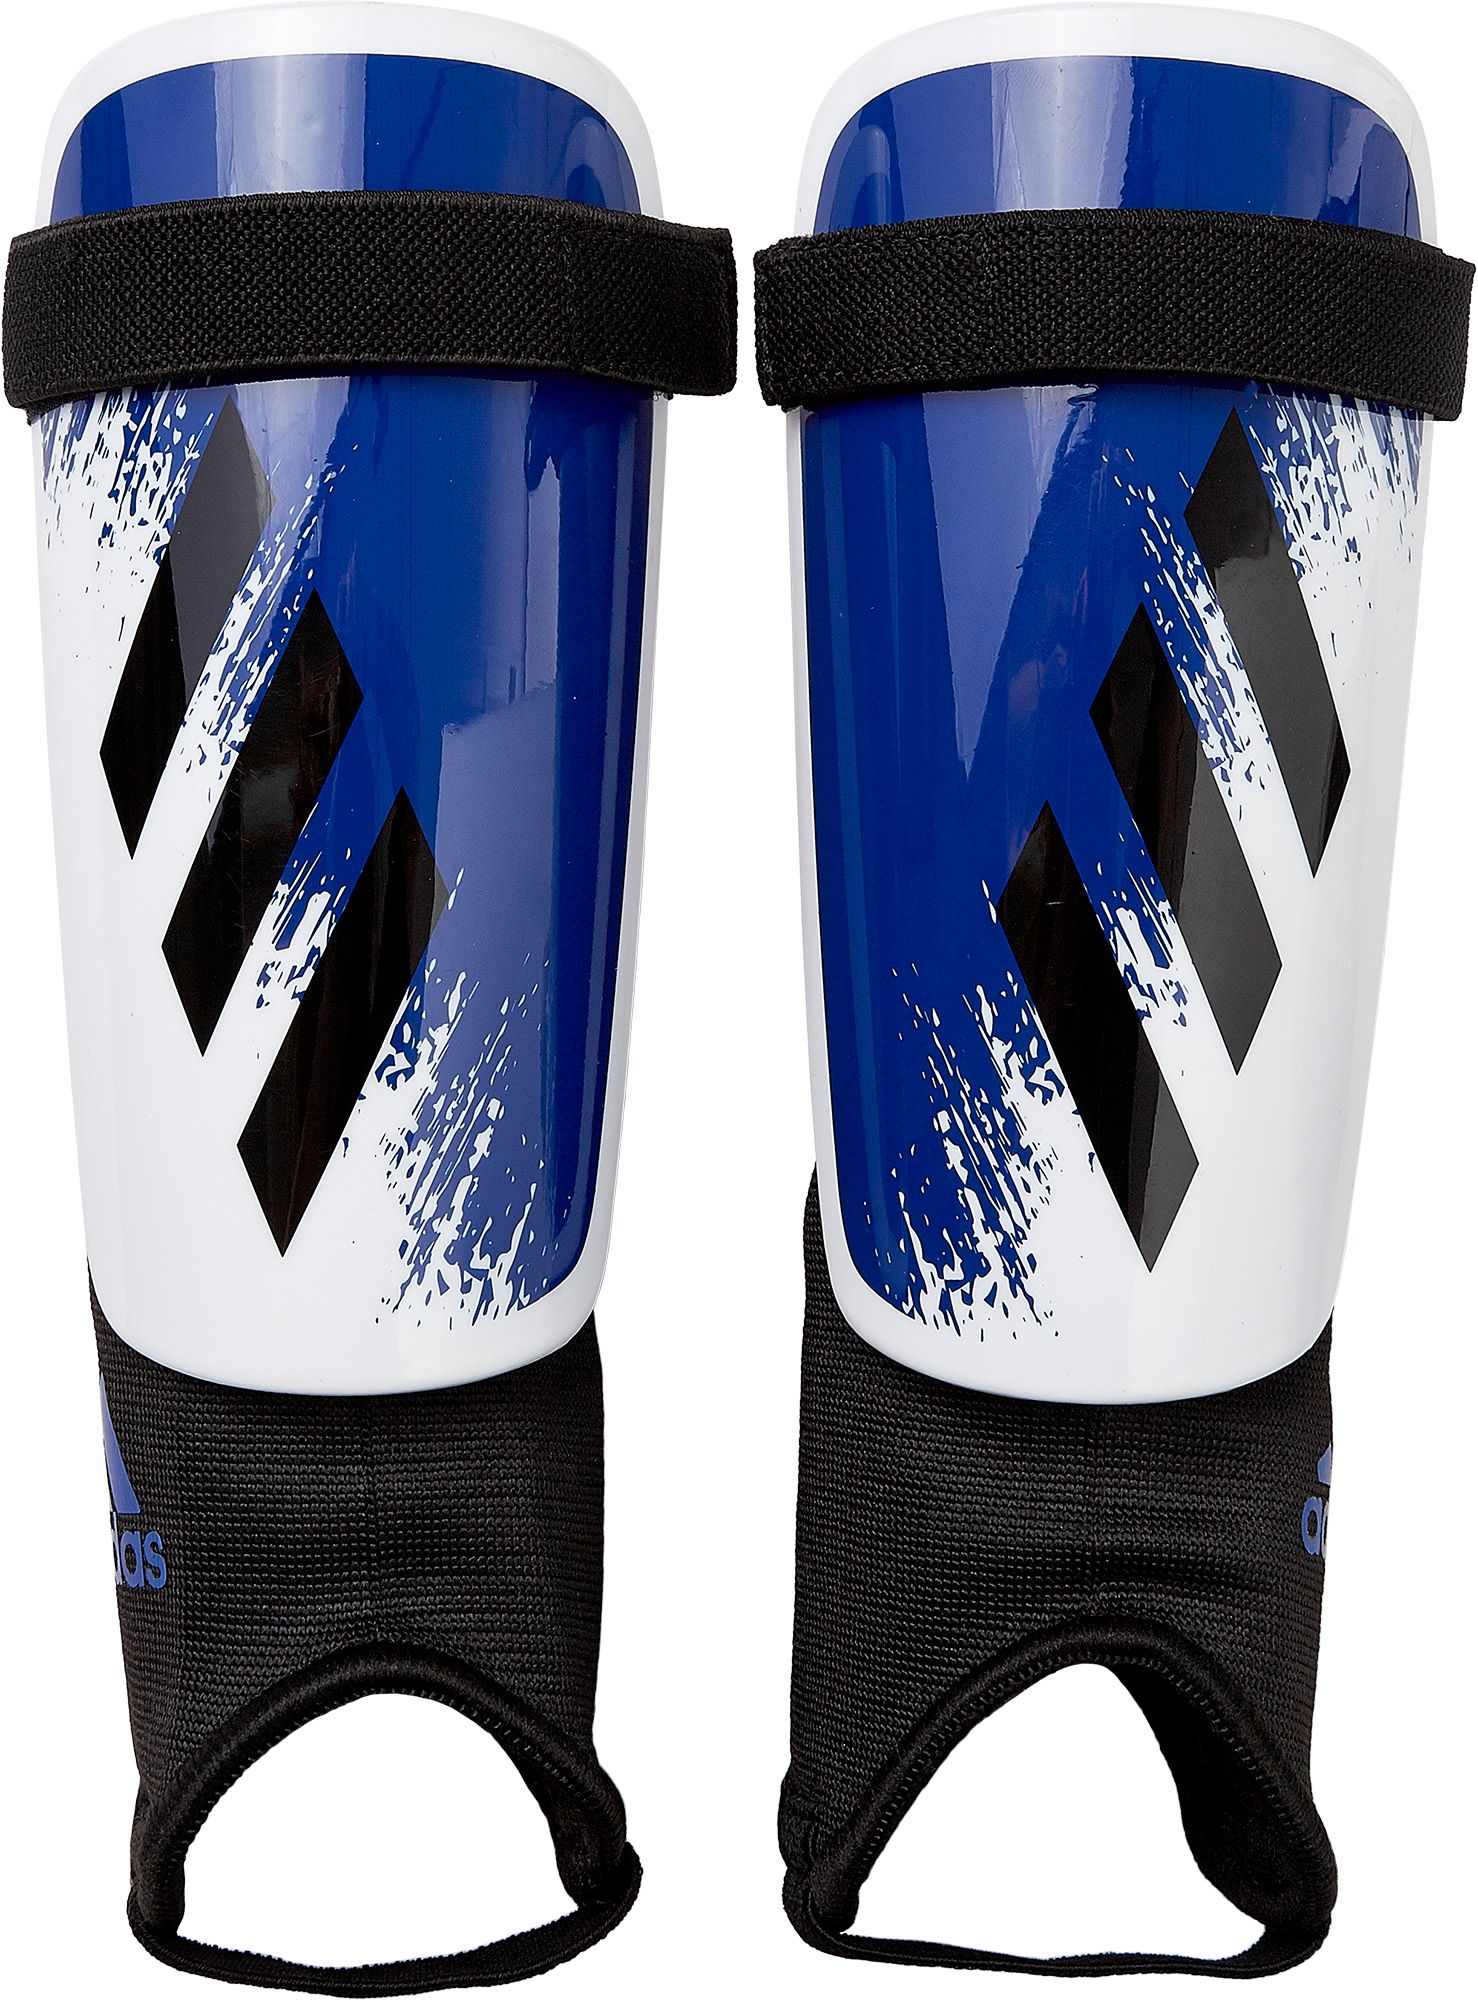 adidas ankle guards